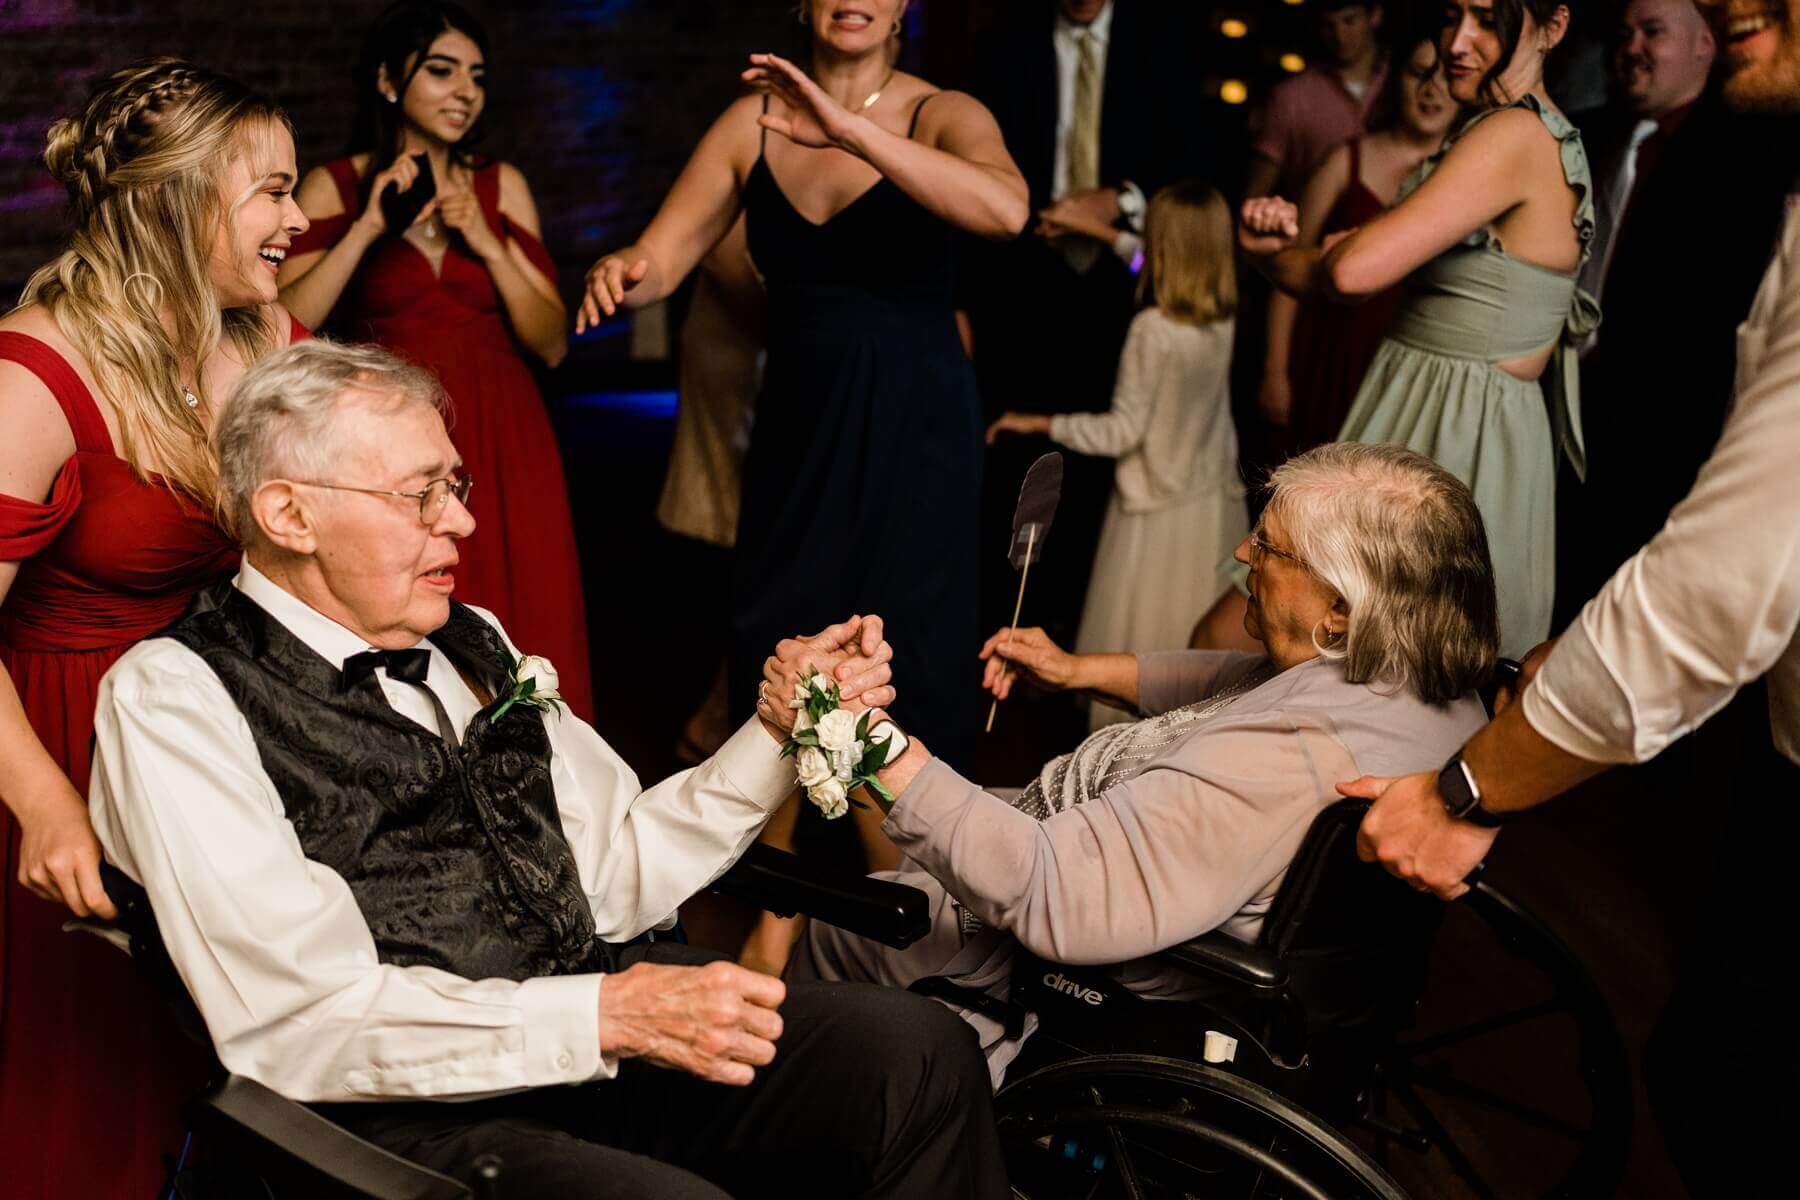 Grandma and grandpa dancing in wheelchairs during wedding reception at The Haight